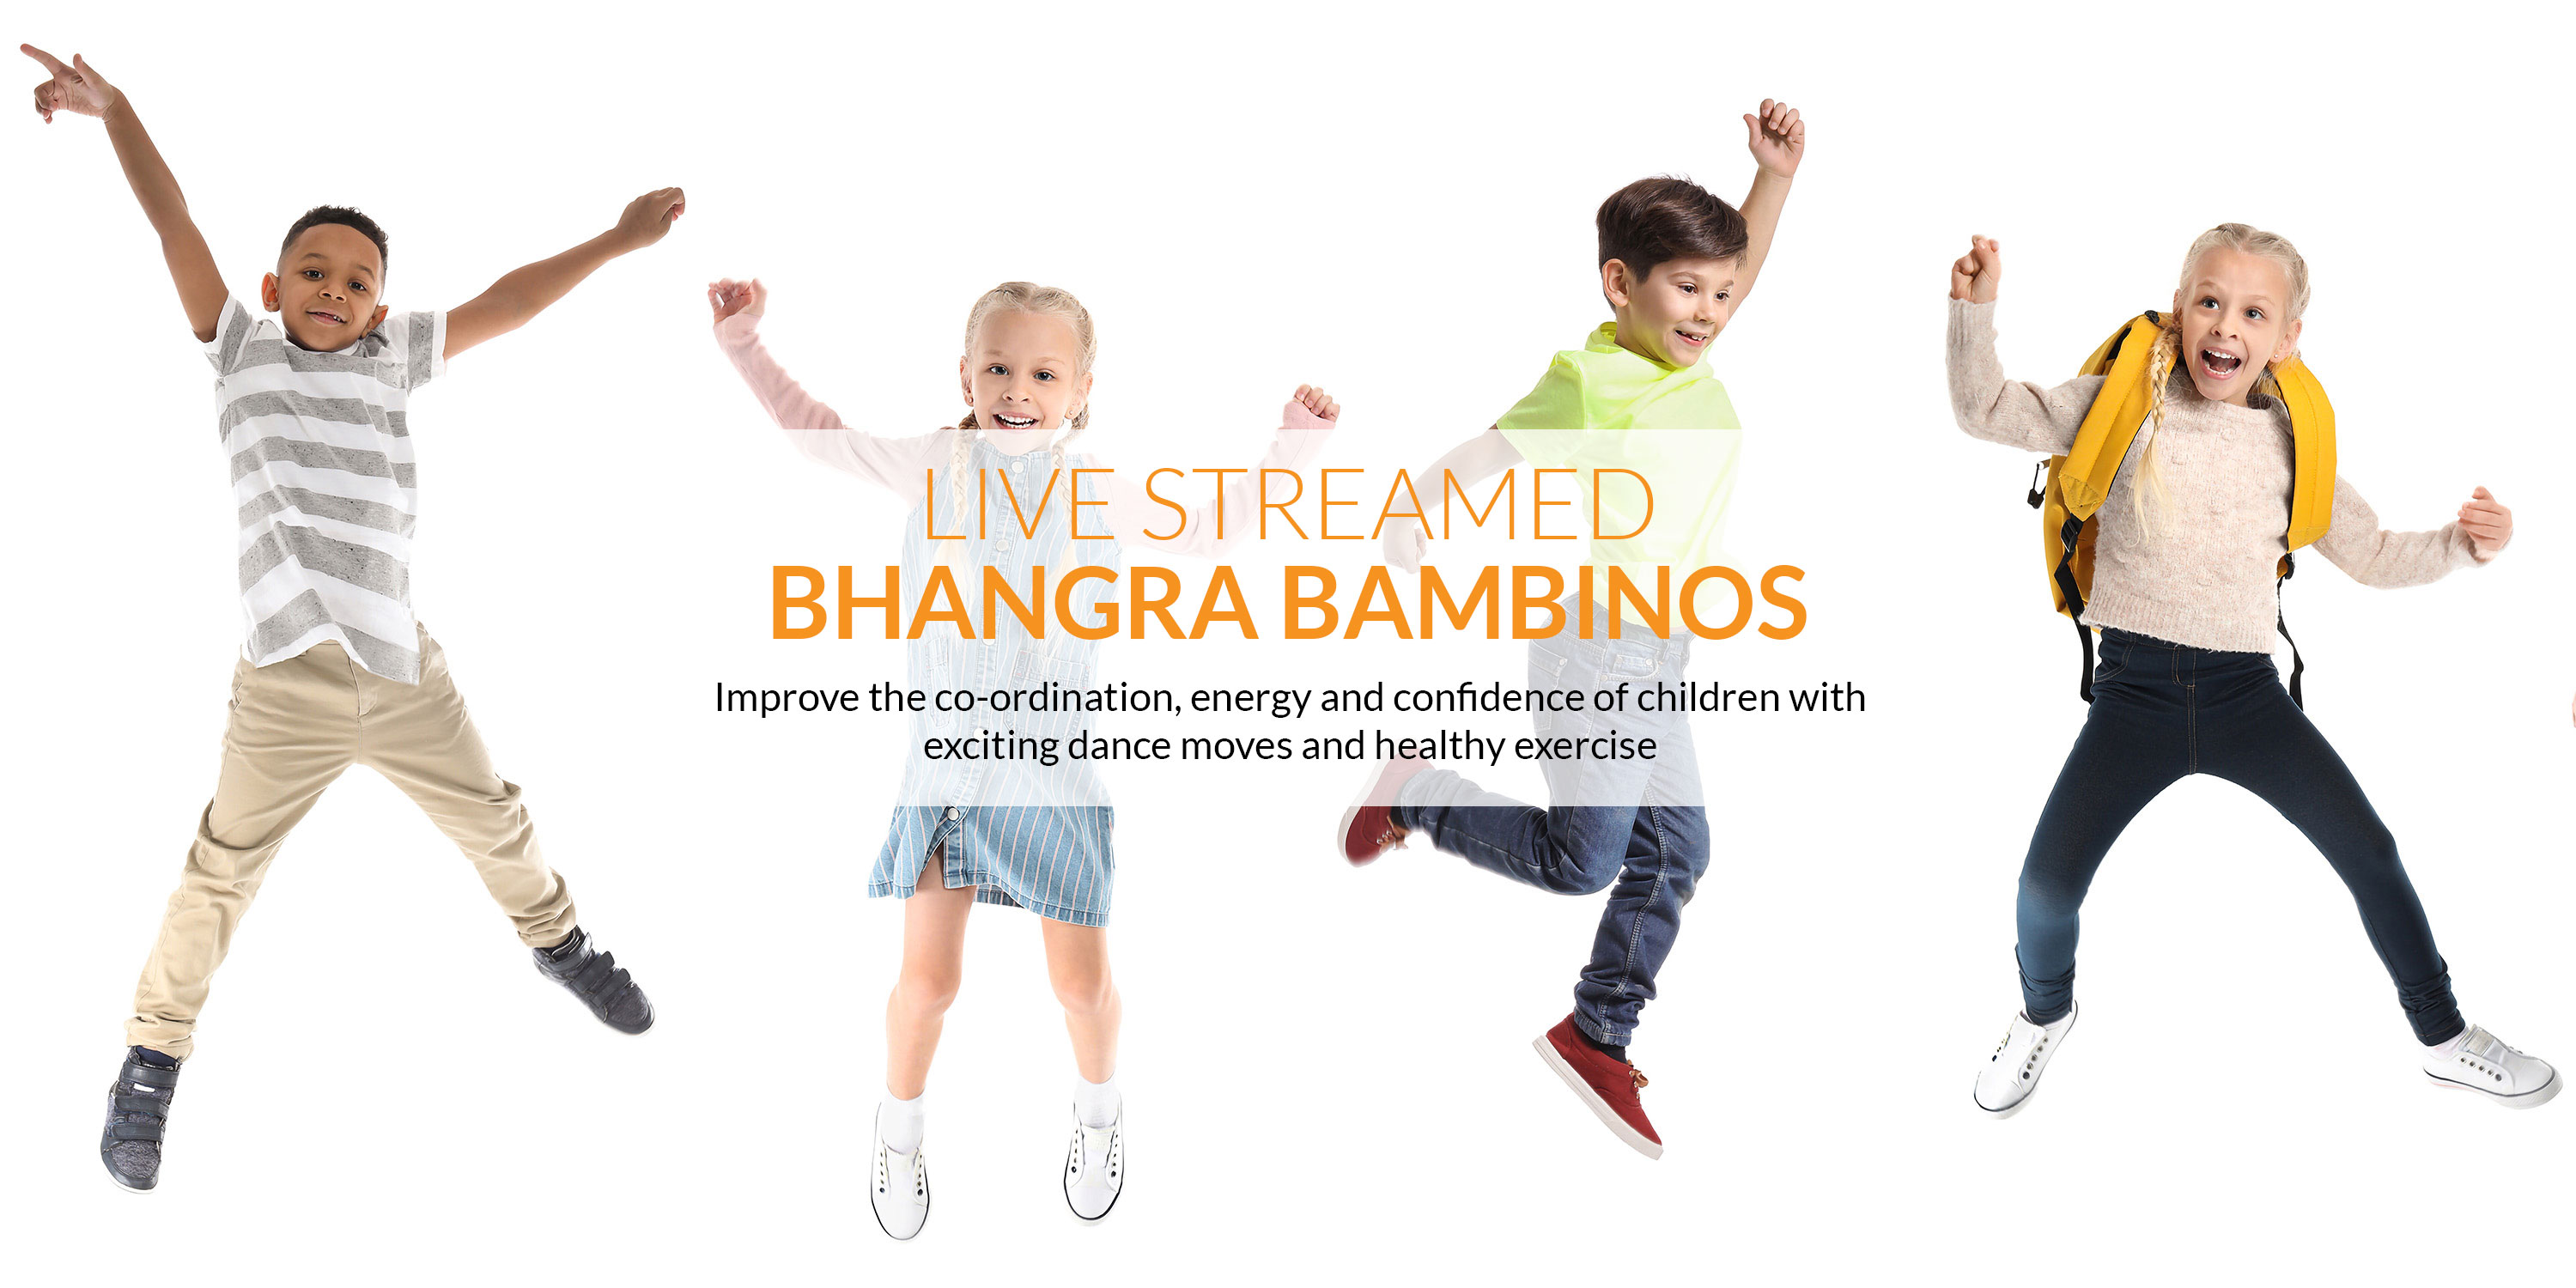 The best Bhangra Bambinos live-streamed